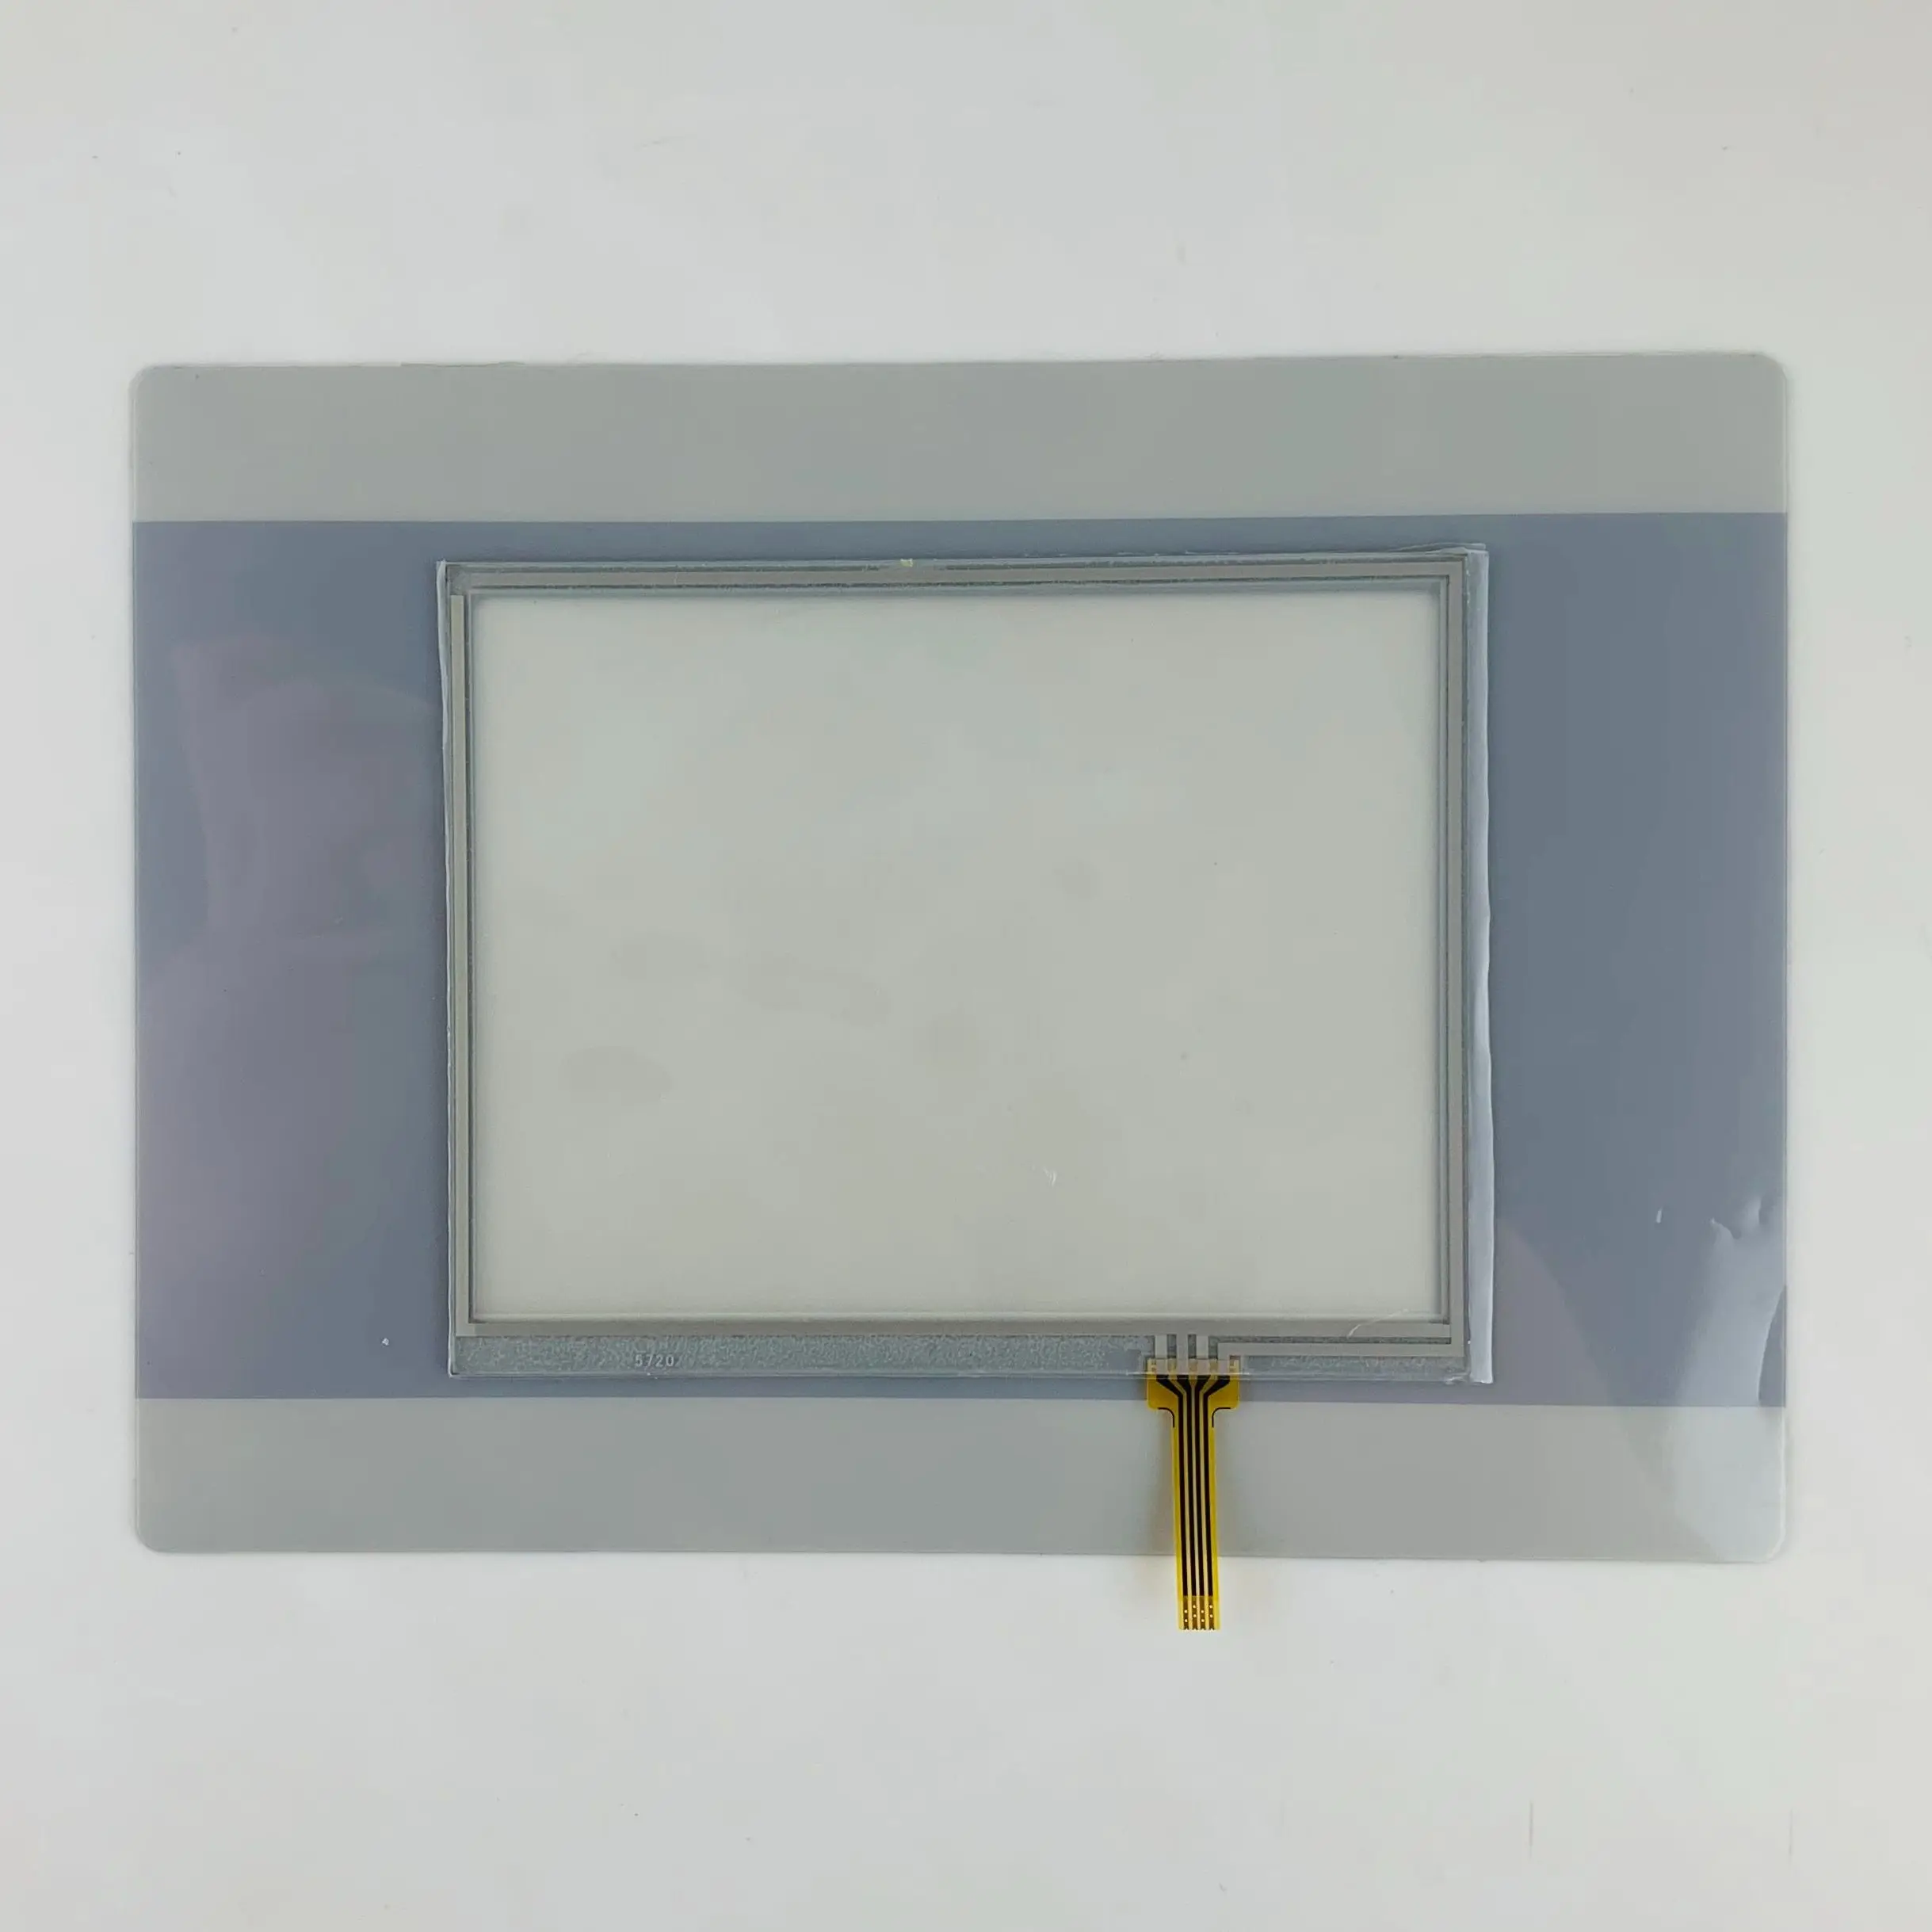 

XV-102-D6-57TVR-10 Touch Glass With Film For EATON HMI Machine Operator's Panel Repair~Do It Yourself,Have In Stock